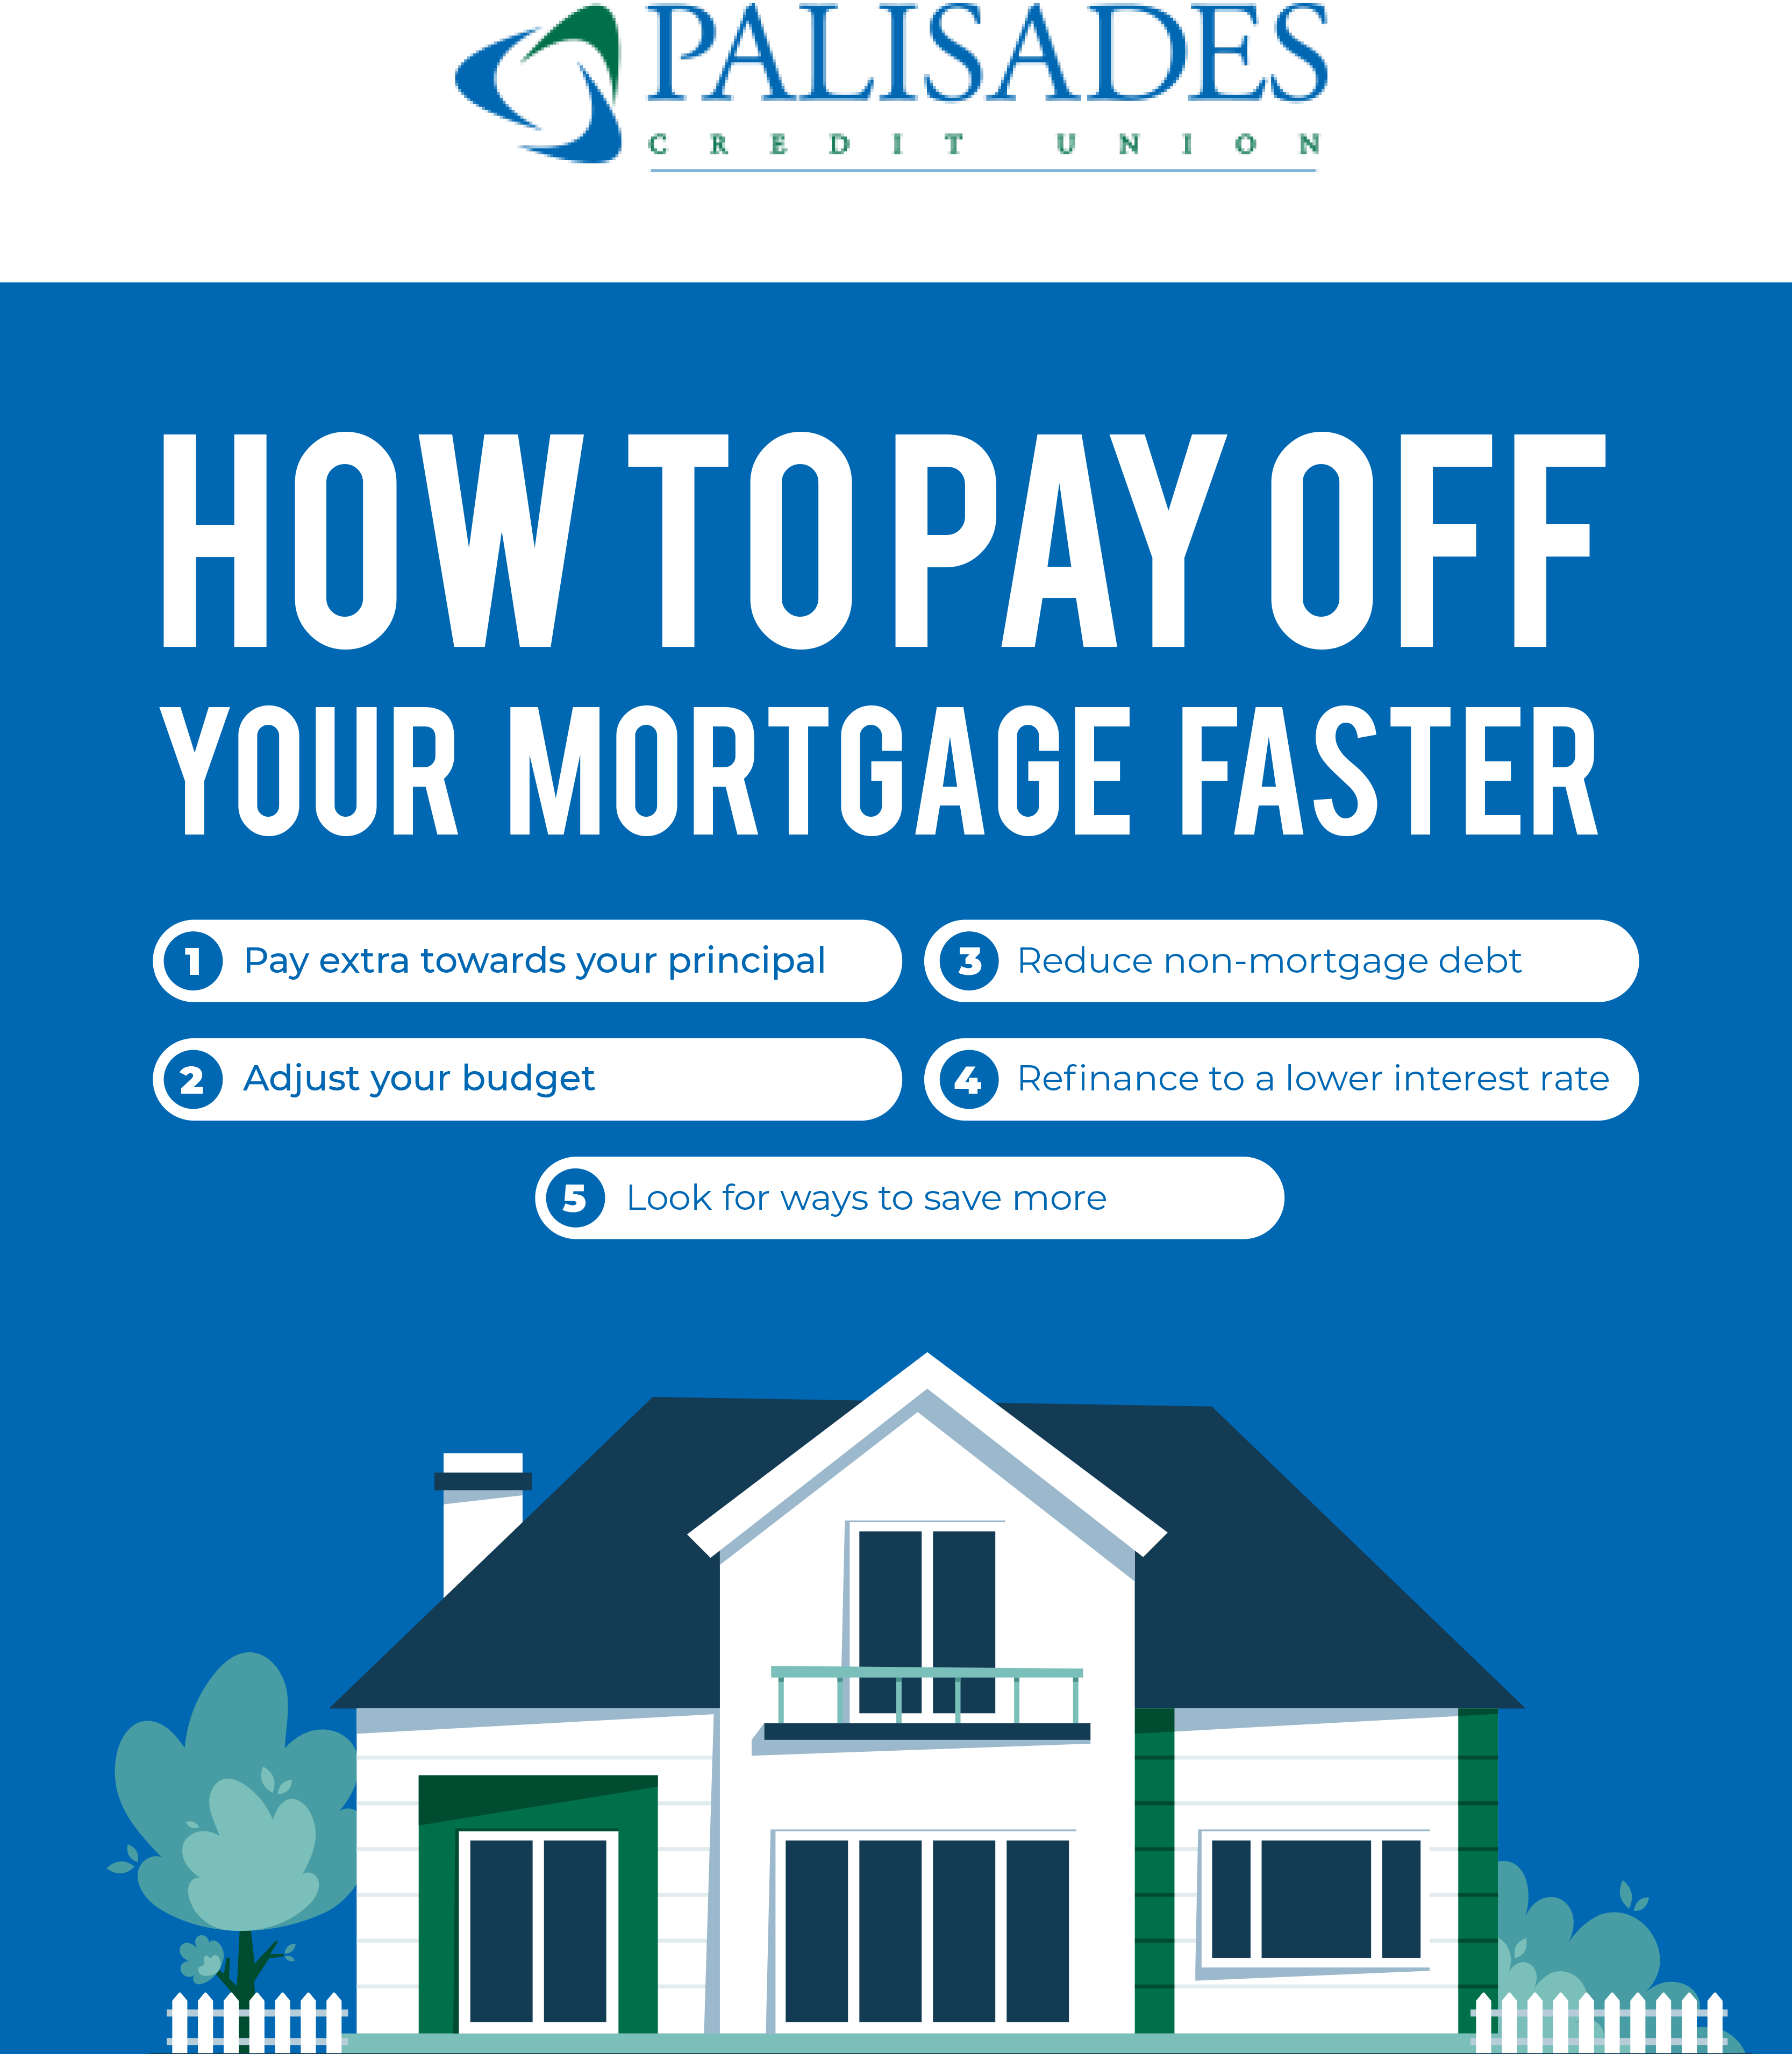  How To Pay off Your Mortgage Faster: 1. Pay extra towards your principal 2.Adjust your budget 3.Reduce non-mortgage debt 4.Refinance to a lower interest rate 5.Look for ways to save more